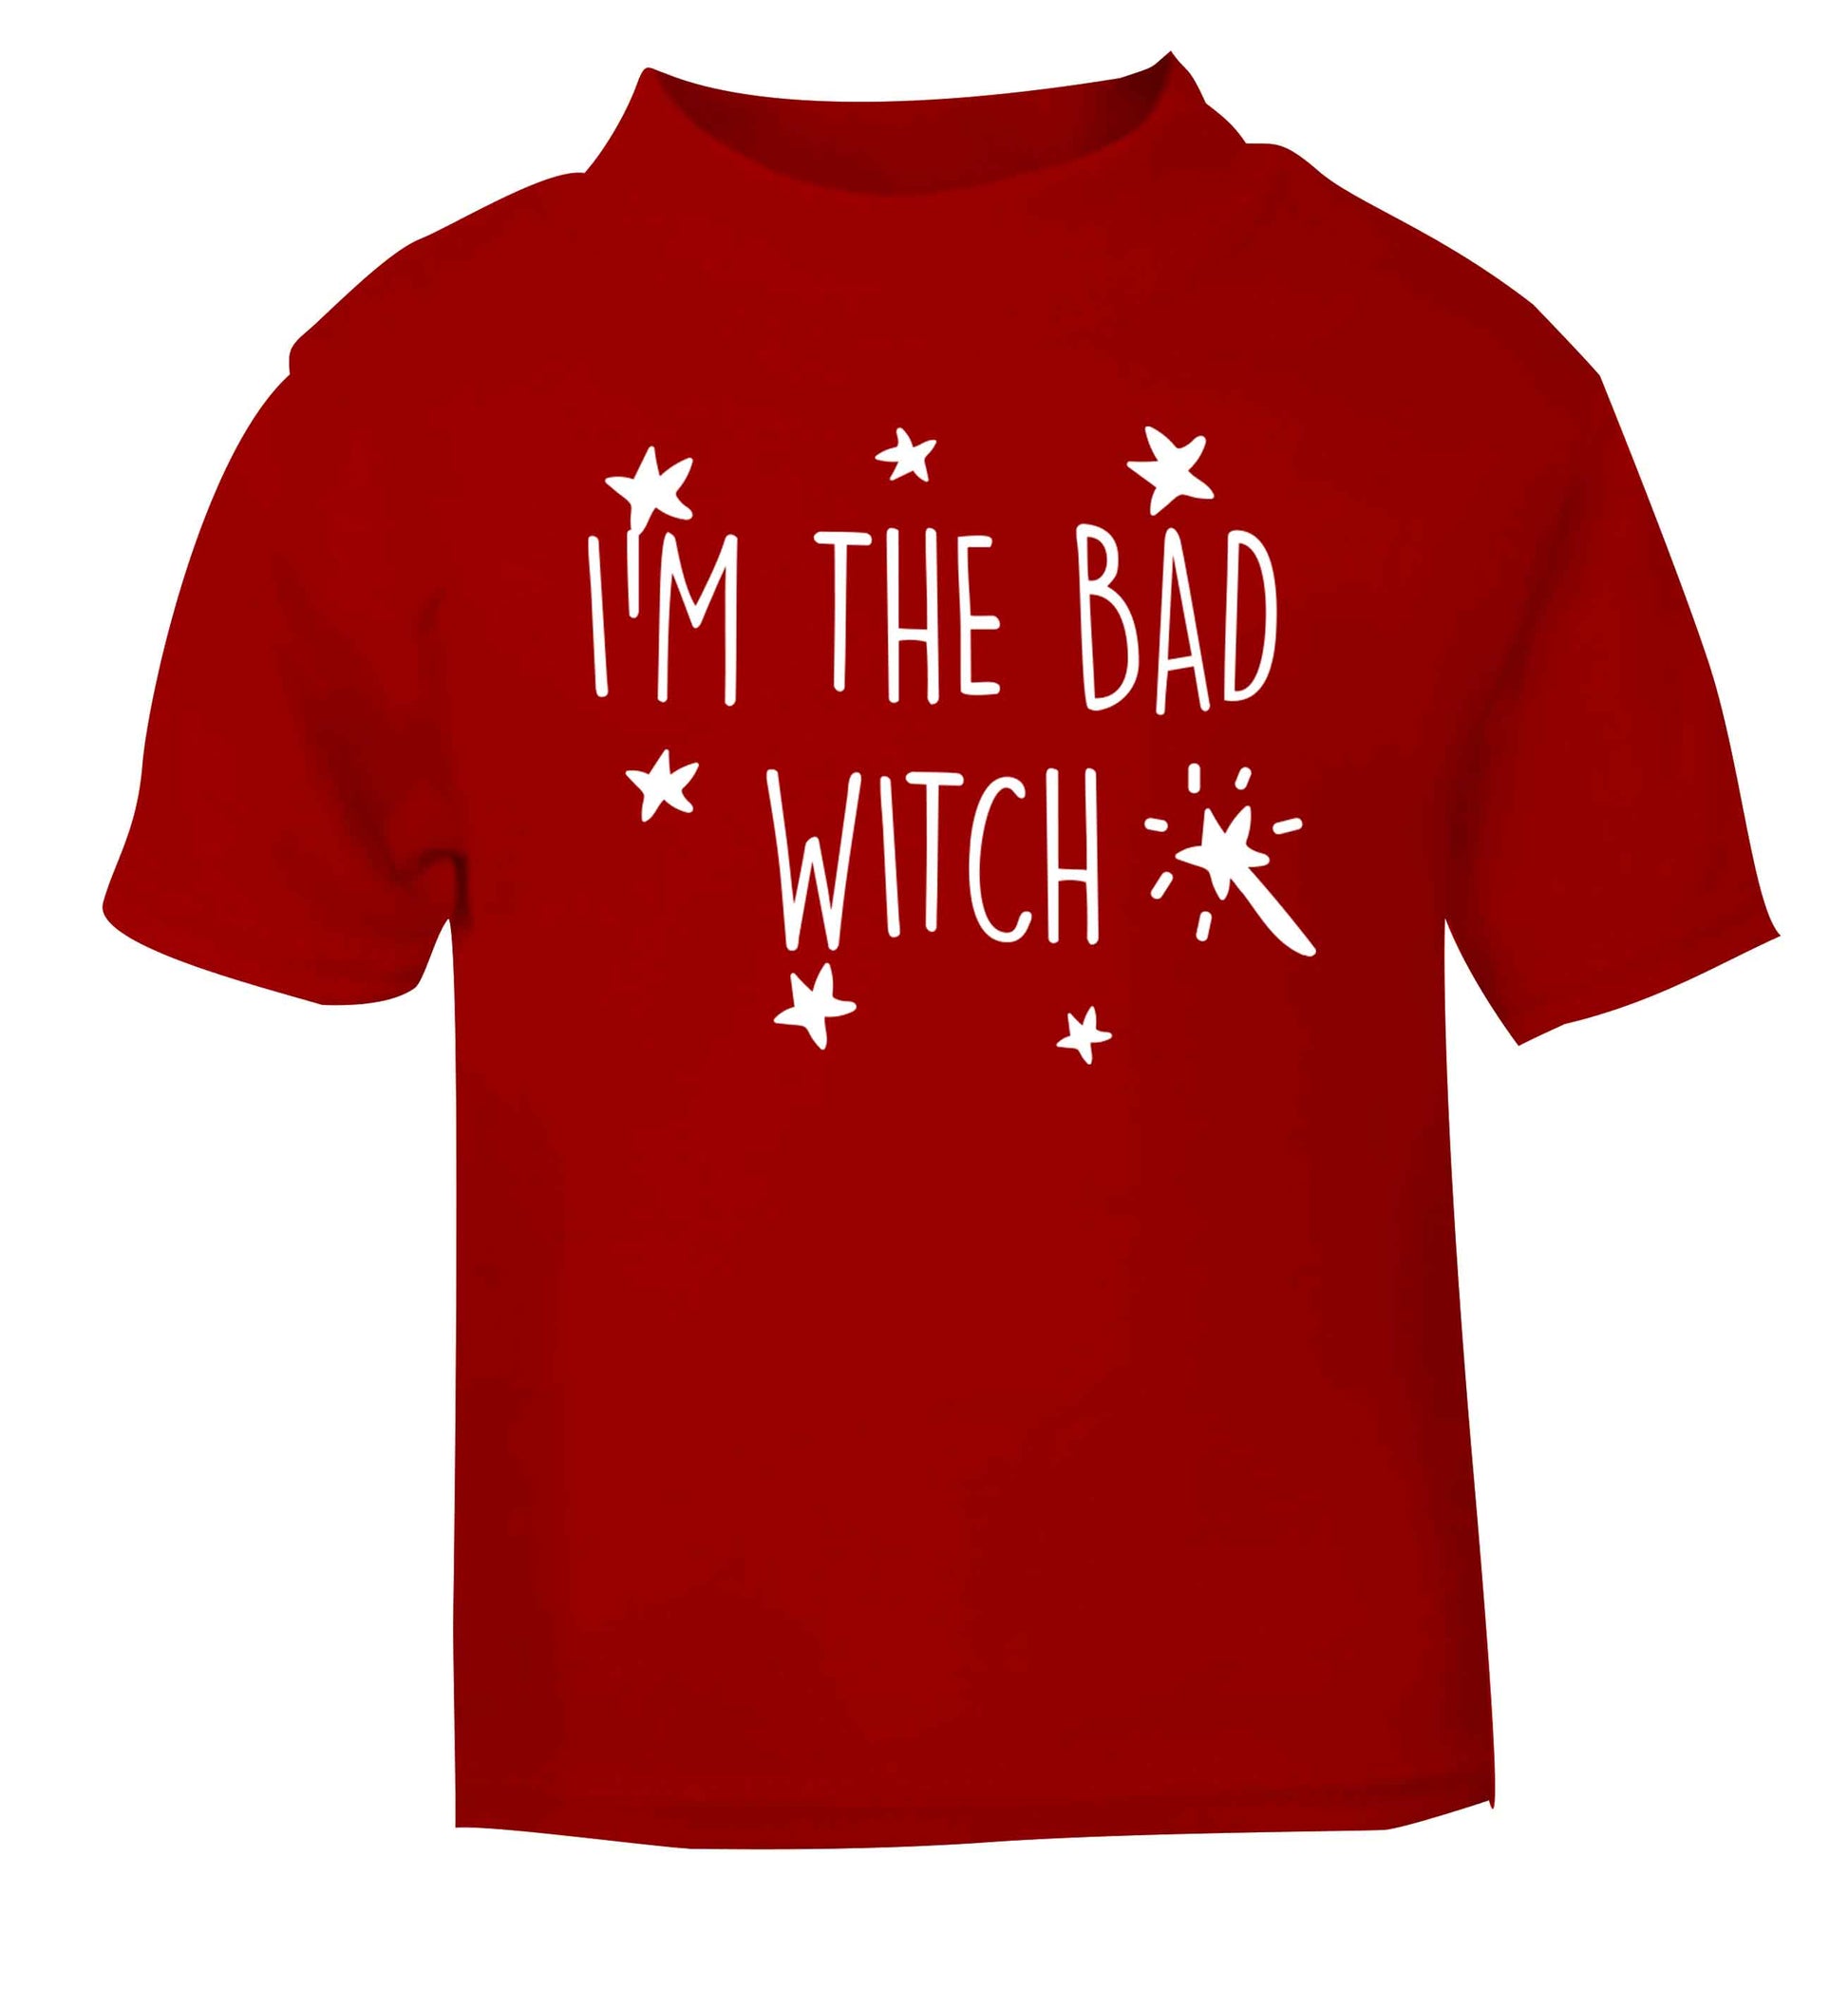 Bad witch red baby toddler Tshirt 2 Years